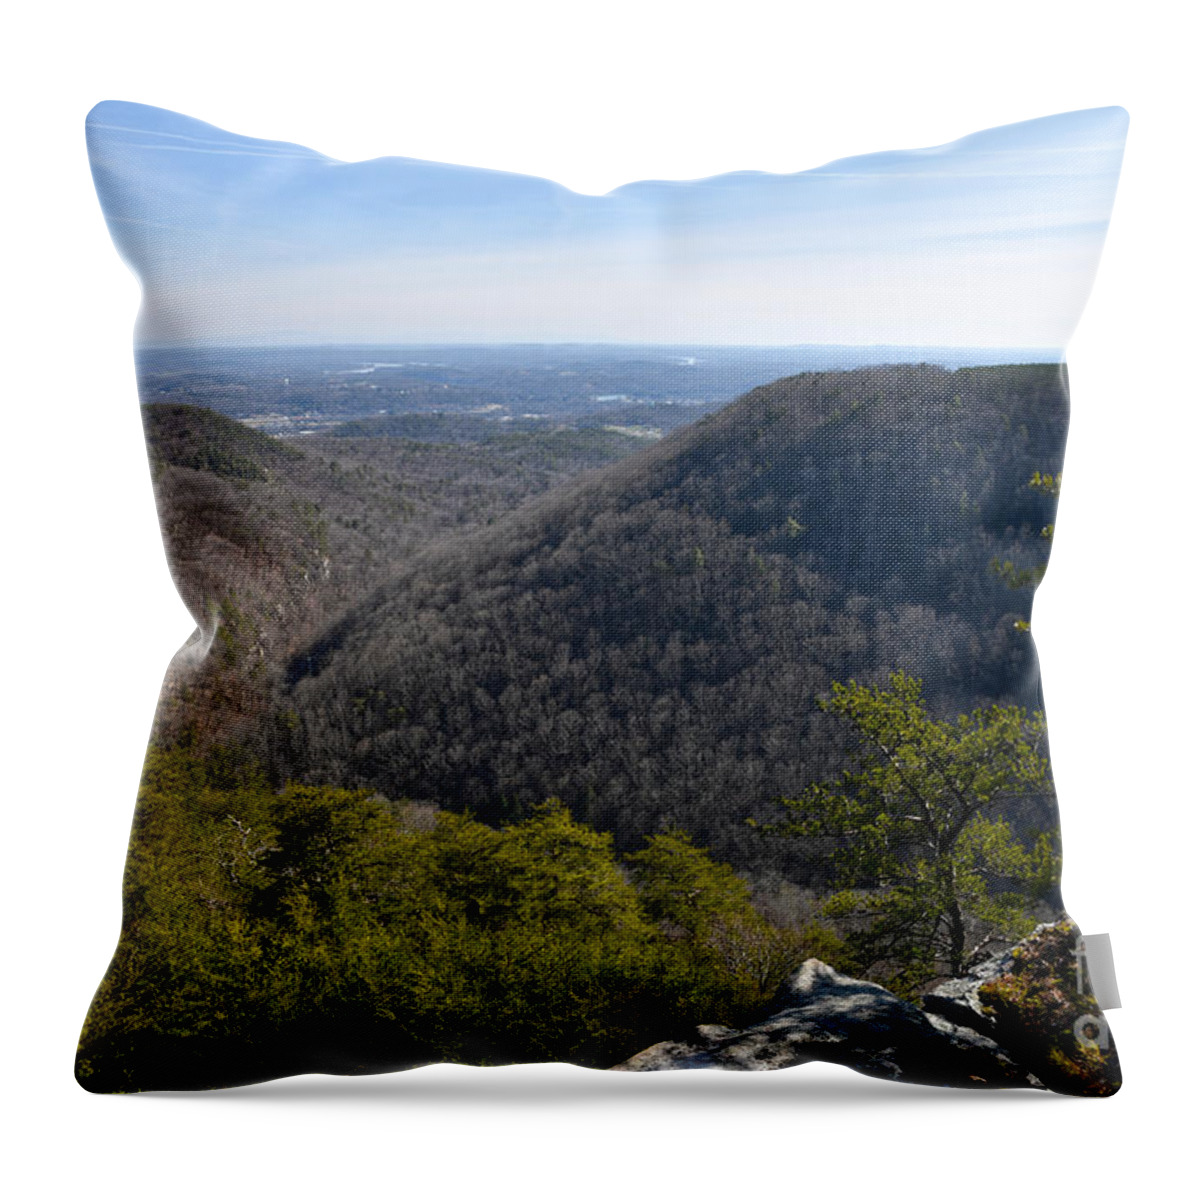 Cumberland Plateau Throw Pillow featuring the photograph Buzzard Point Overlook 1 by Phil Perkins